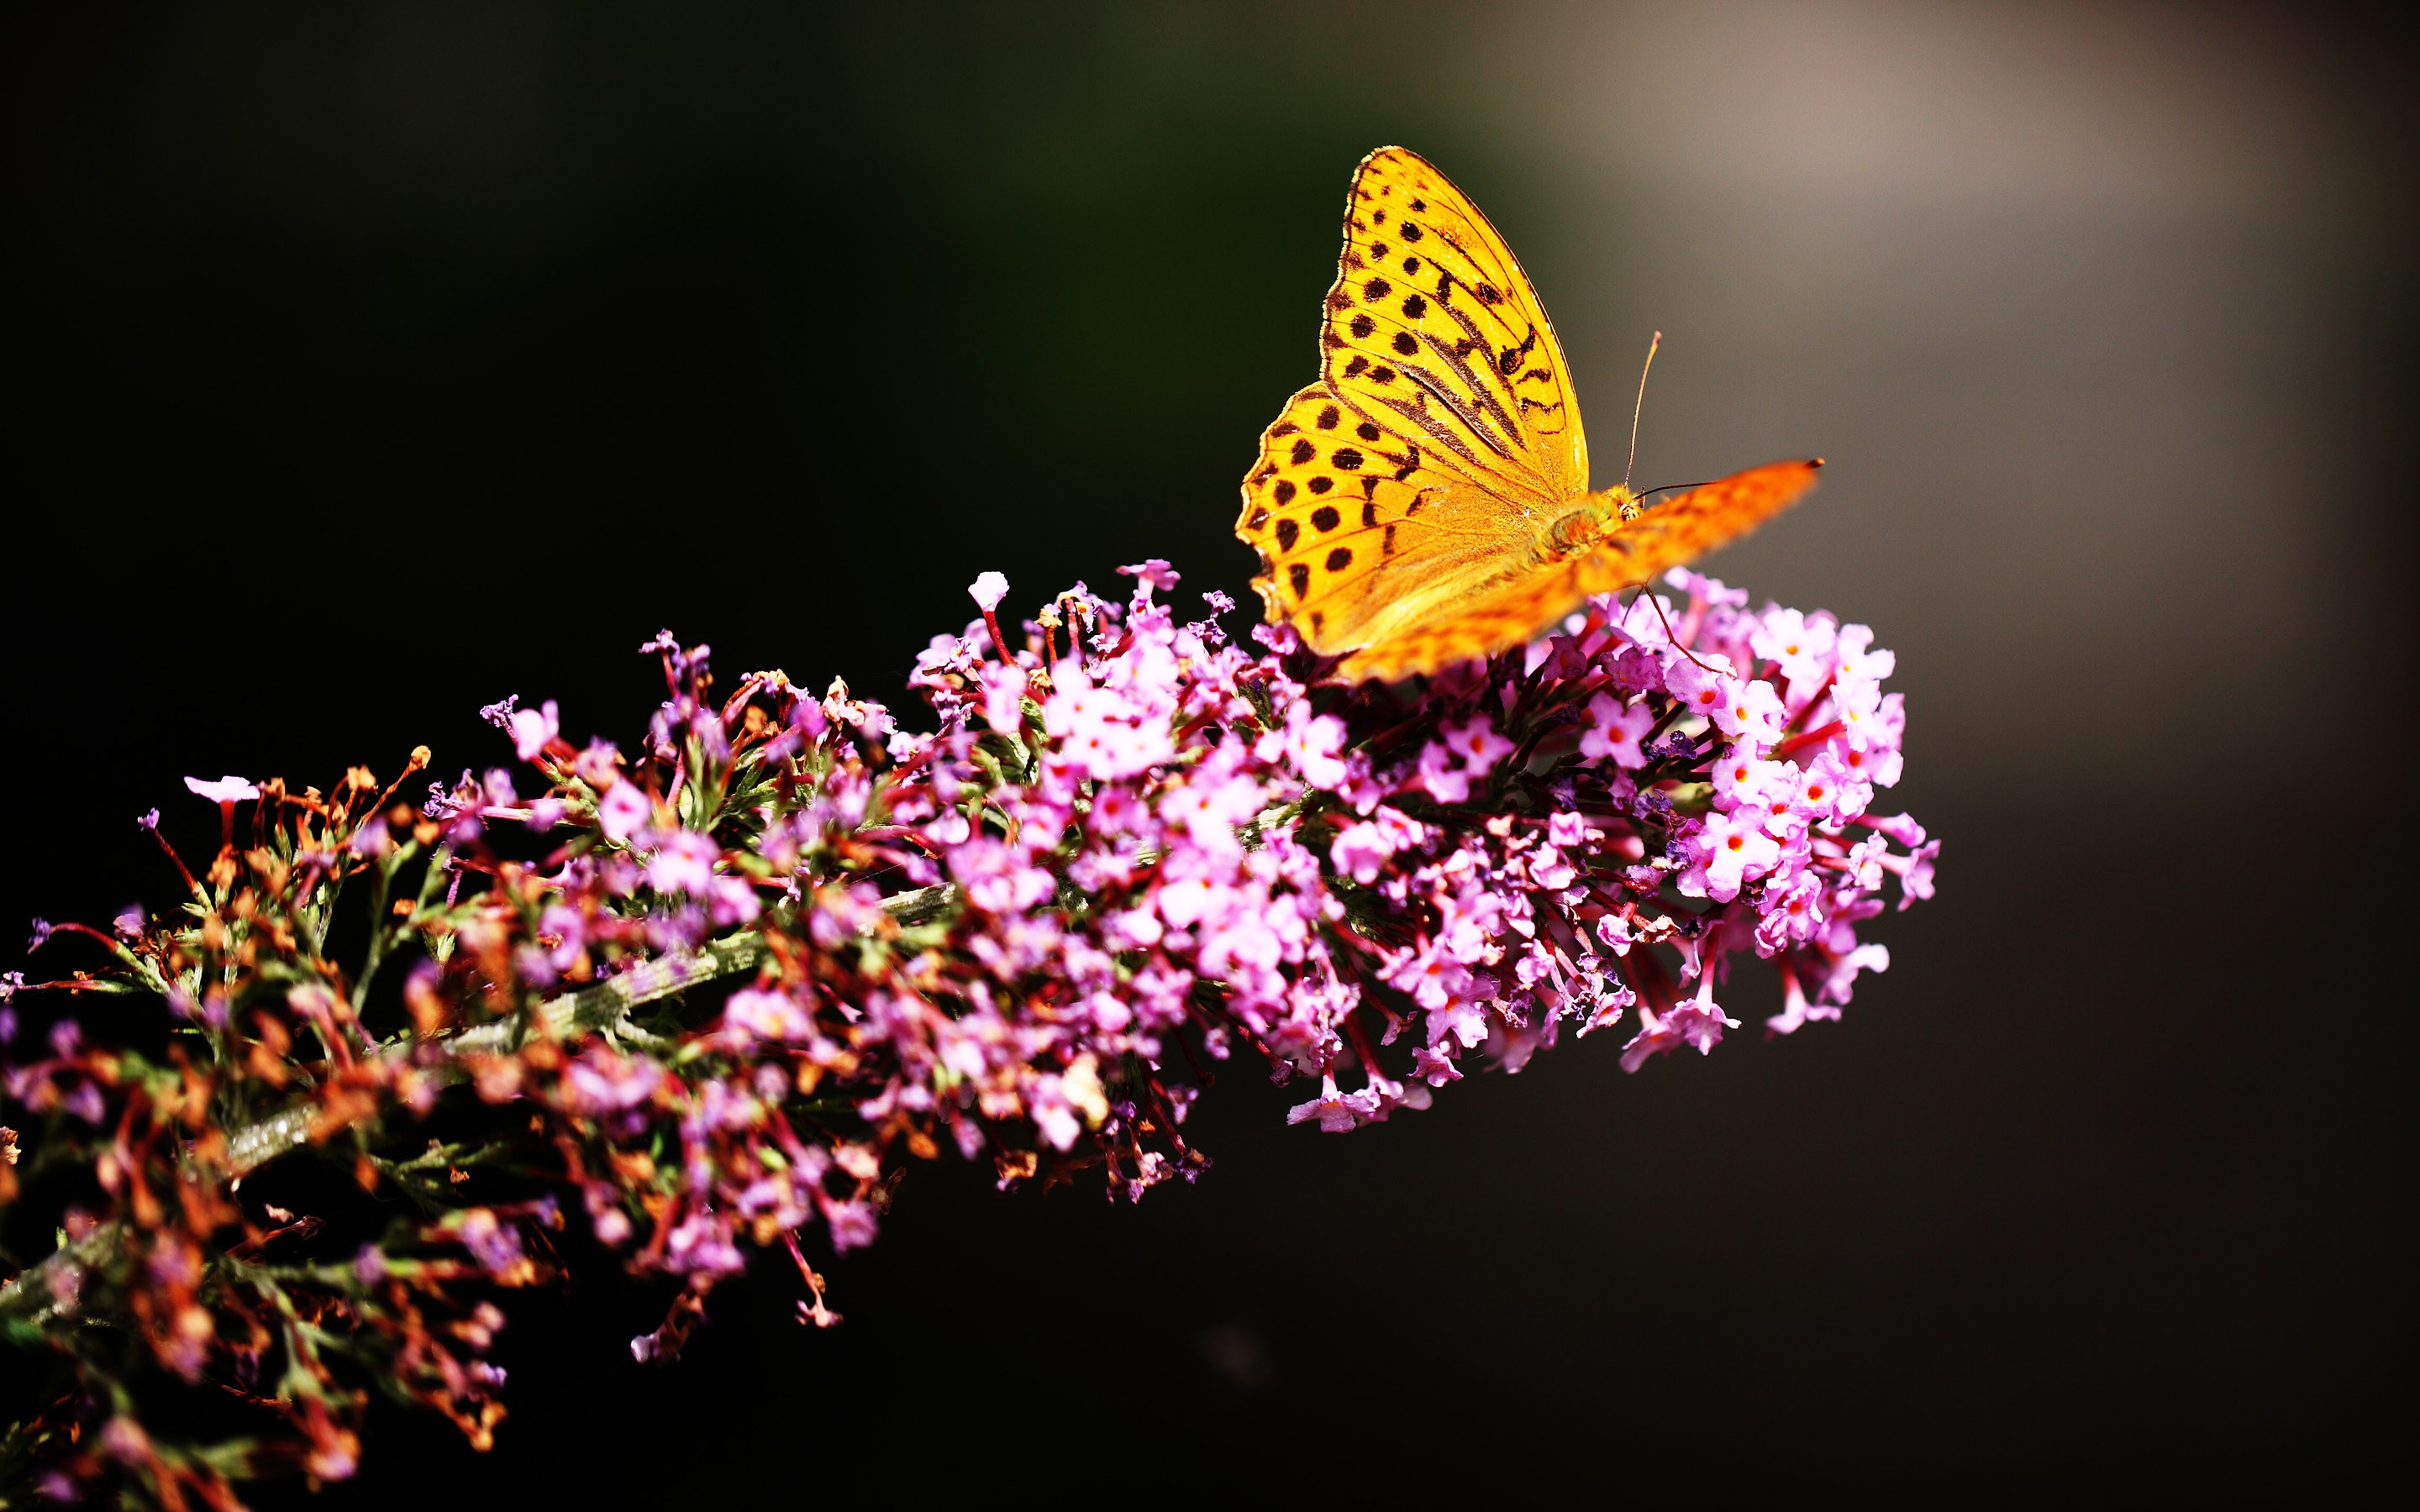 General 2880x1800 nature flowers butterfly insect closeup simple background animals